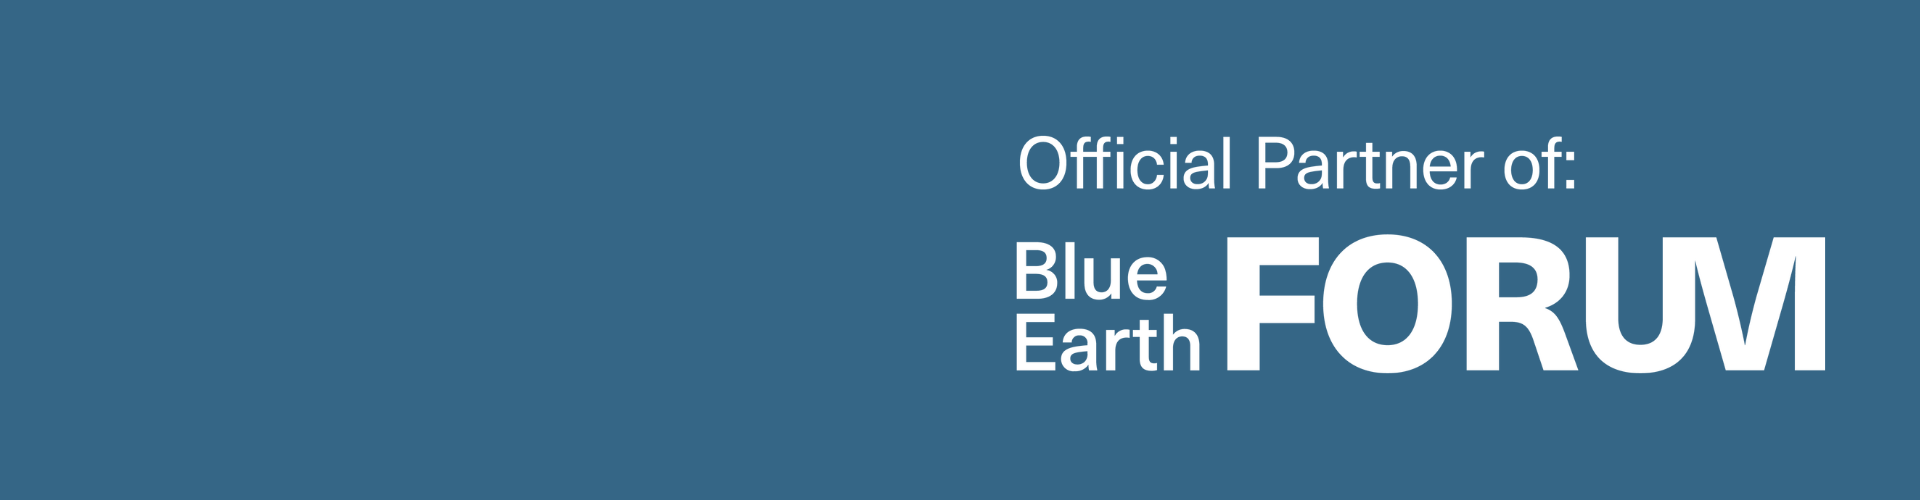 Joelson announces partnership with Blue Earth as Official Partner